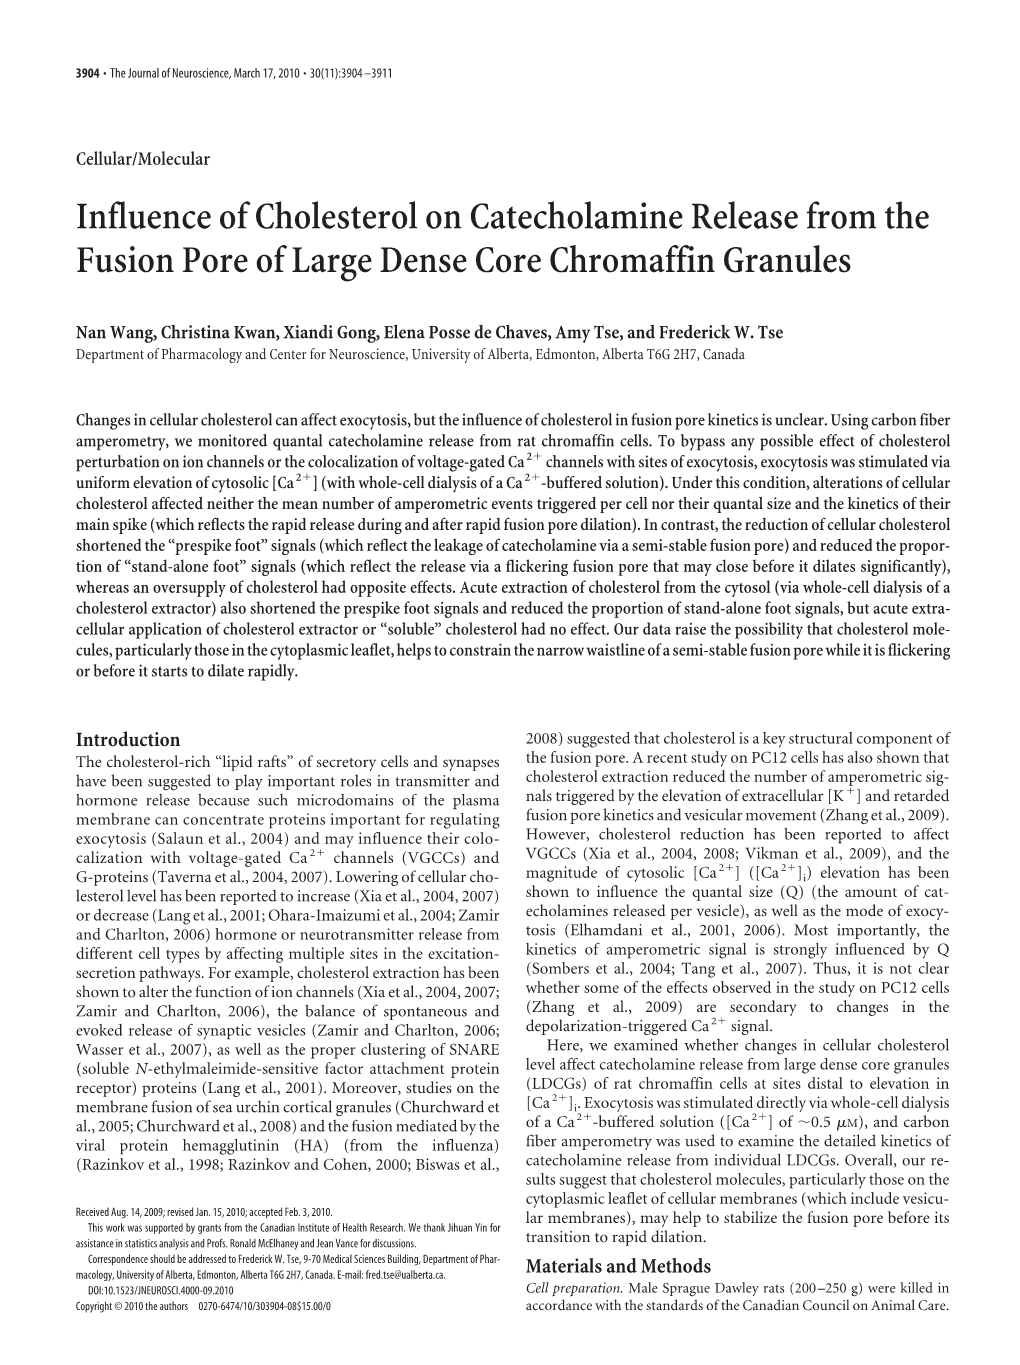 Influence of Cholesterol on Catecholamine Release from the Fusion Pore of Large Dense Core Chromaffin Granules